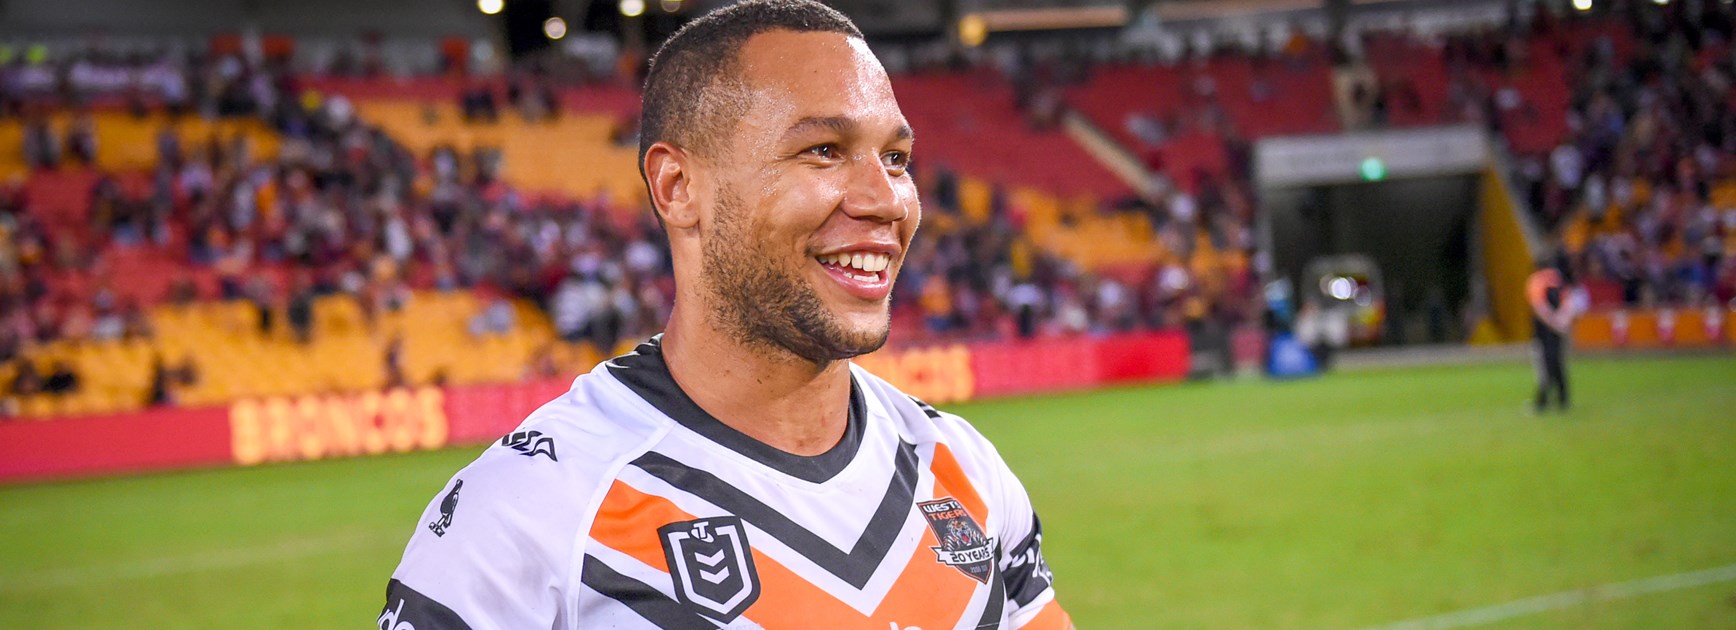 Moses Mbye to depart Wests Tigers at season's end